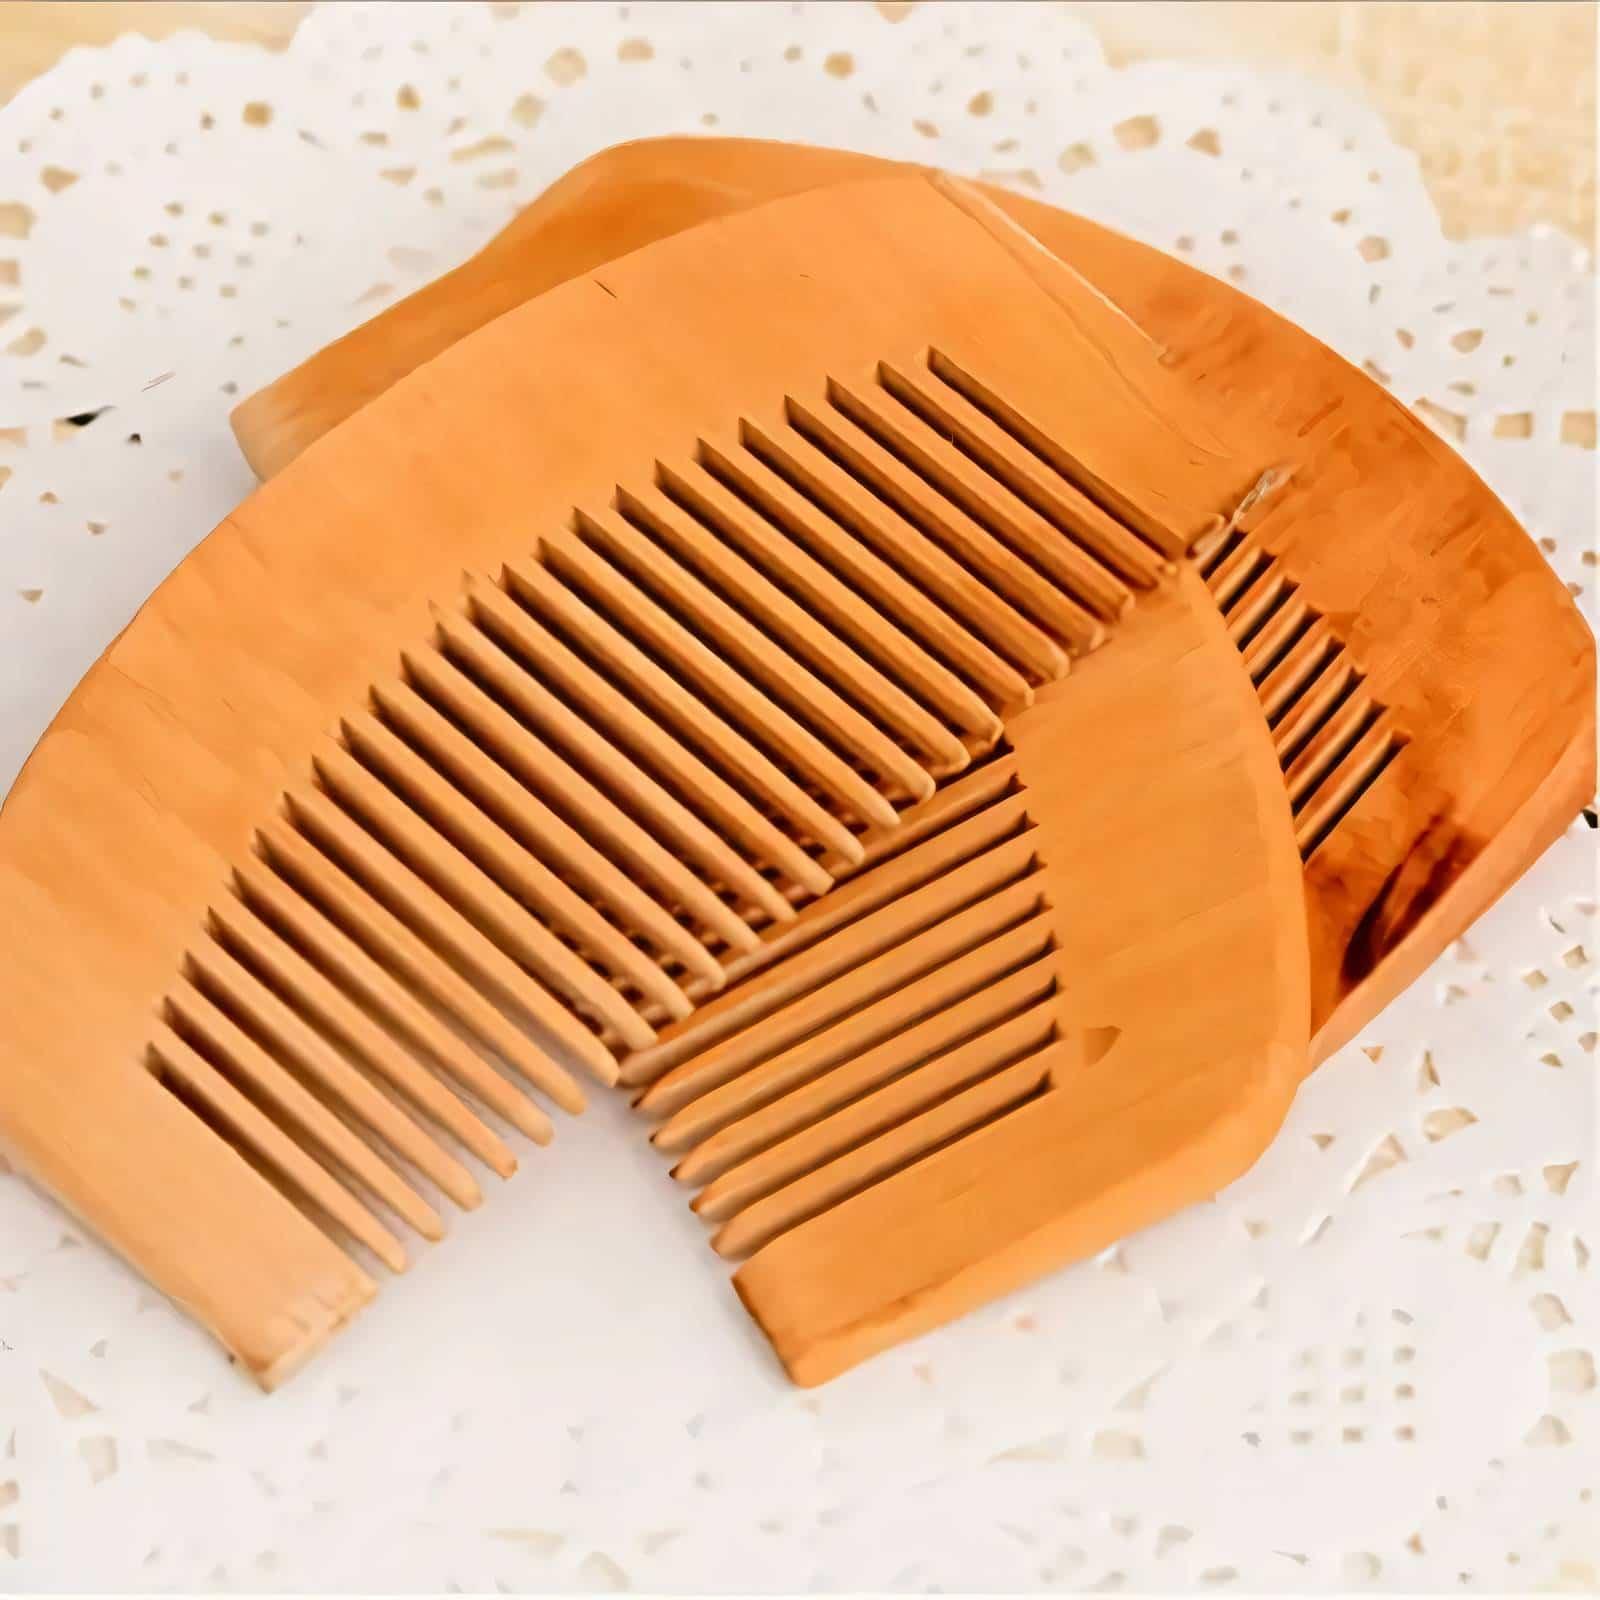 Peach Wood Comb – Sustainable, Natural Hair Care - Tremmi